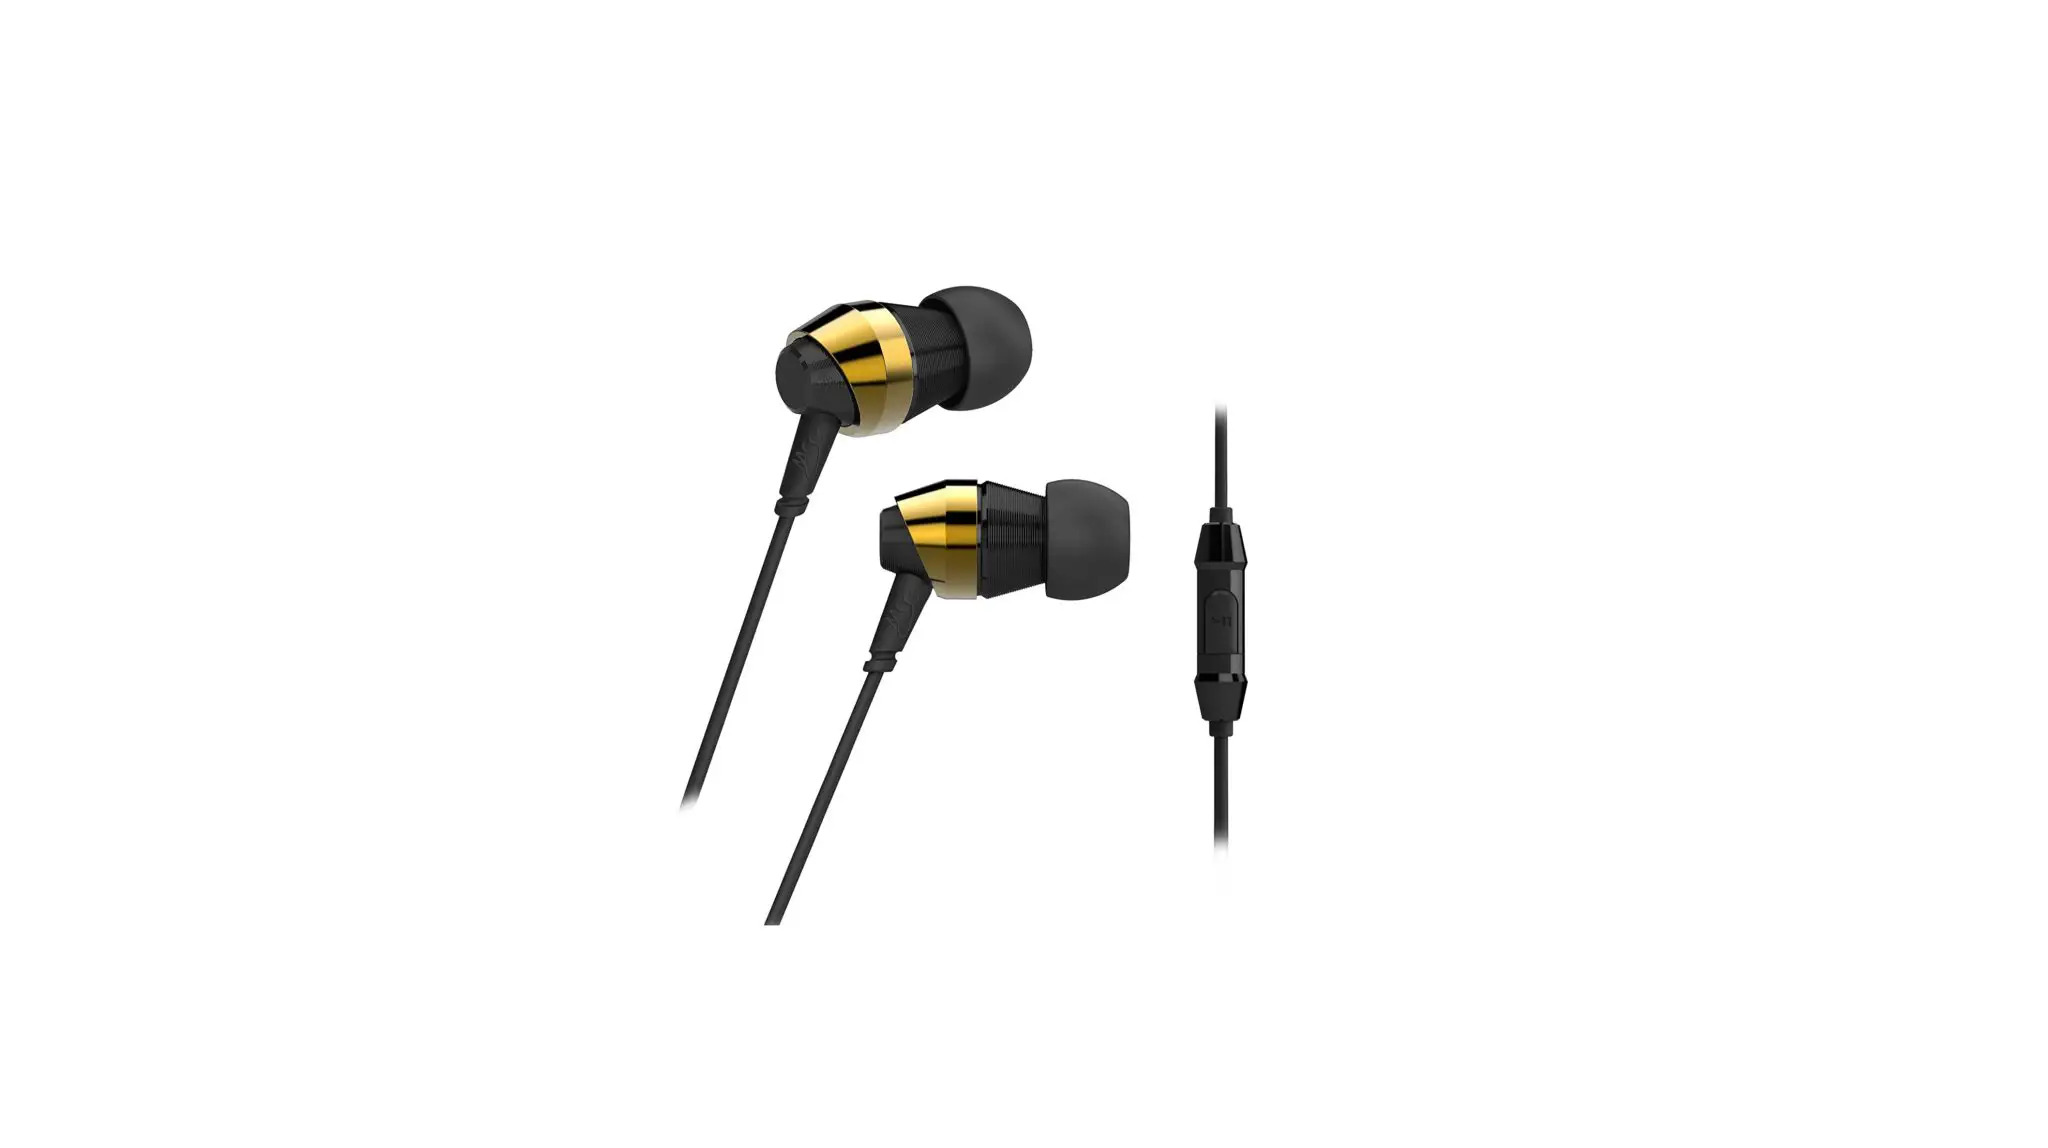 M-Duo Dual Dynamic Driver Noise-Isolating In-Ear Headset